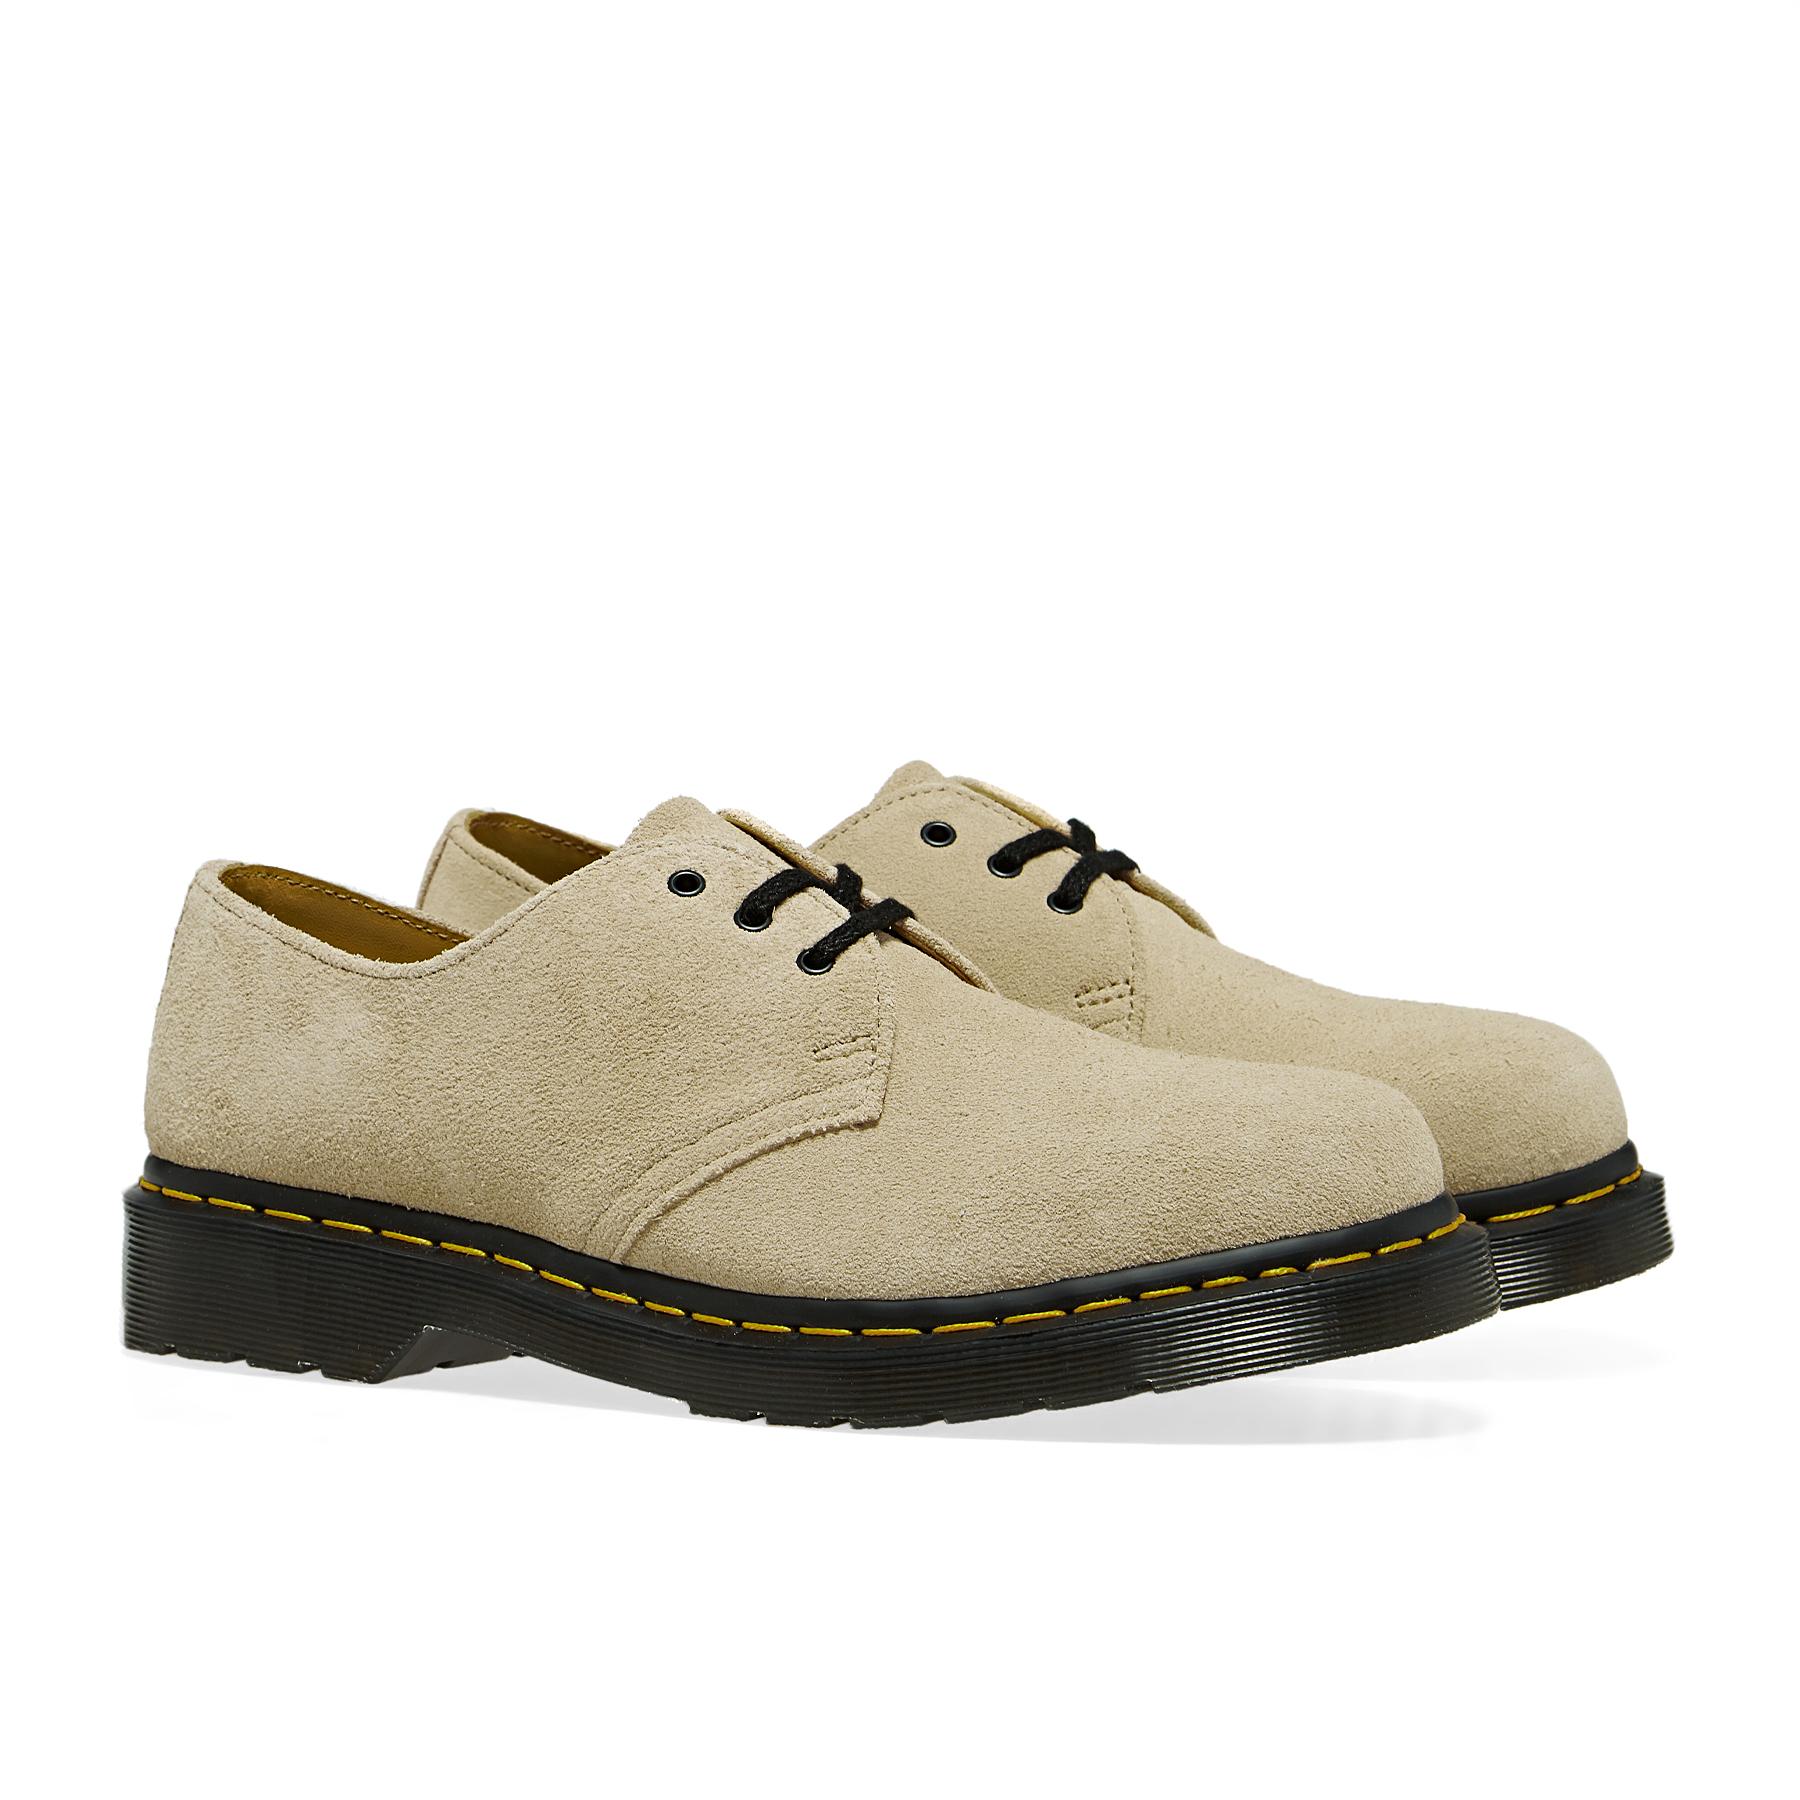 Dr. Martens 1461 3 Eye Shoe Shoes in Natural | Lyst